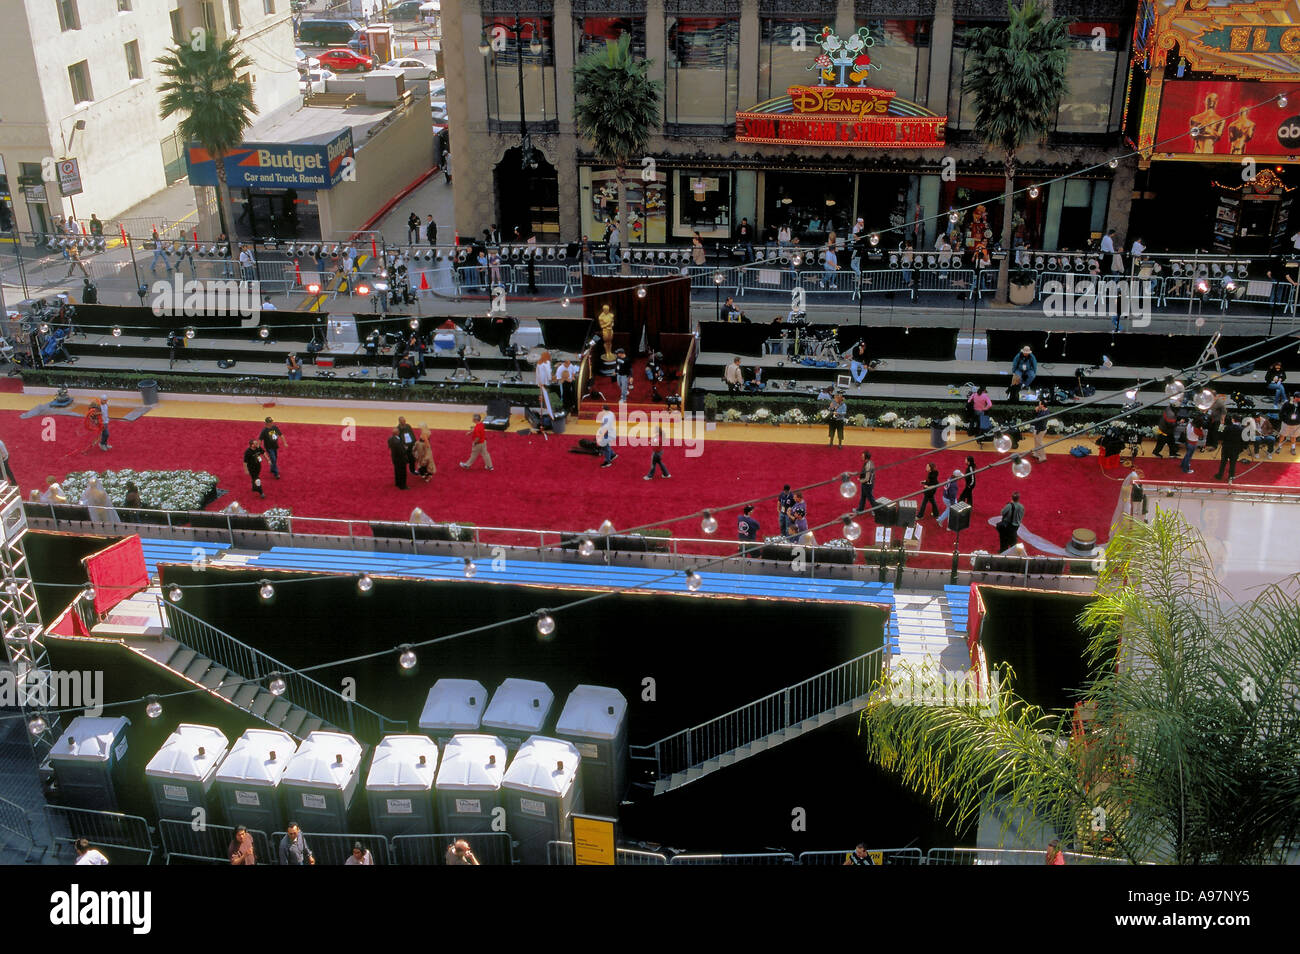 A view from above the red carpet on which stars will walk toward the Kodak Theatre for the Academy Awards ceremonies Stock Photo